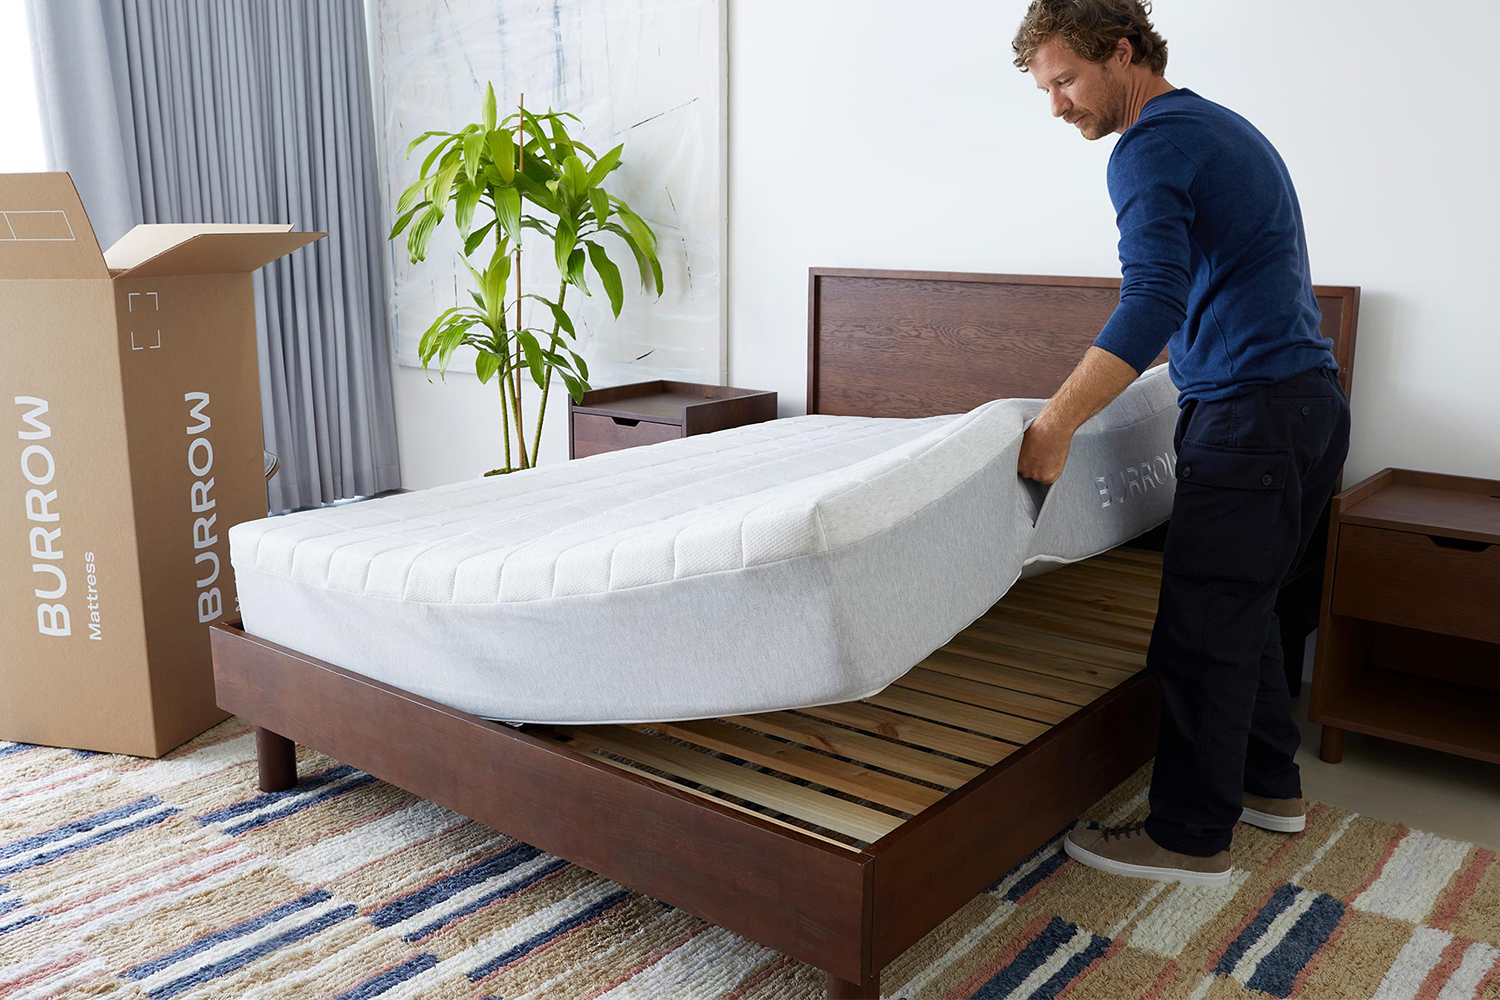 A man lowering a Lyric Mattress from Burrow onto the DTC furniture company's Circe Bed, both of which launched in February 2022